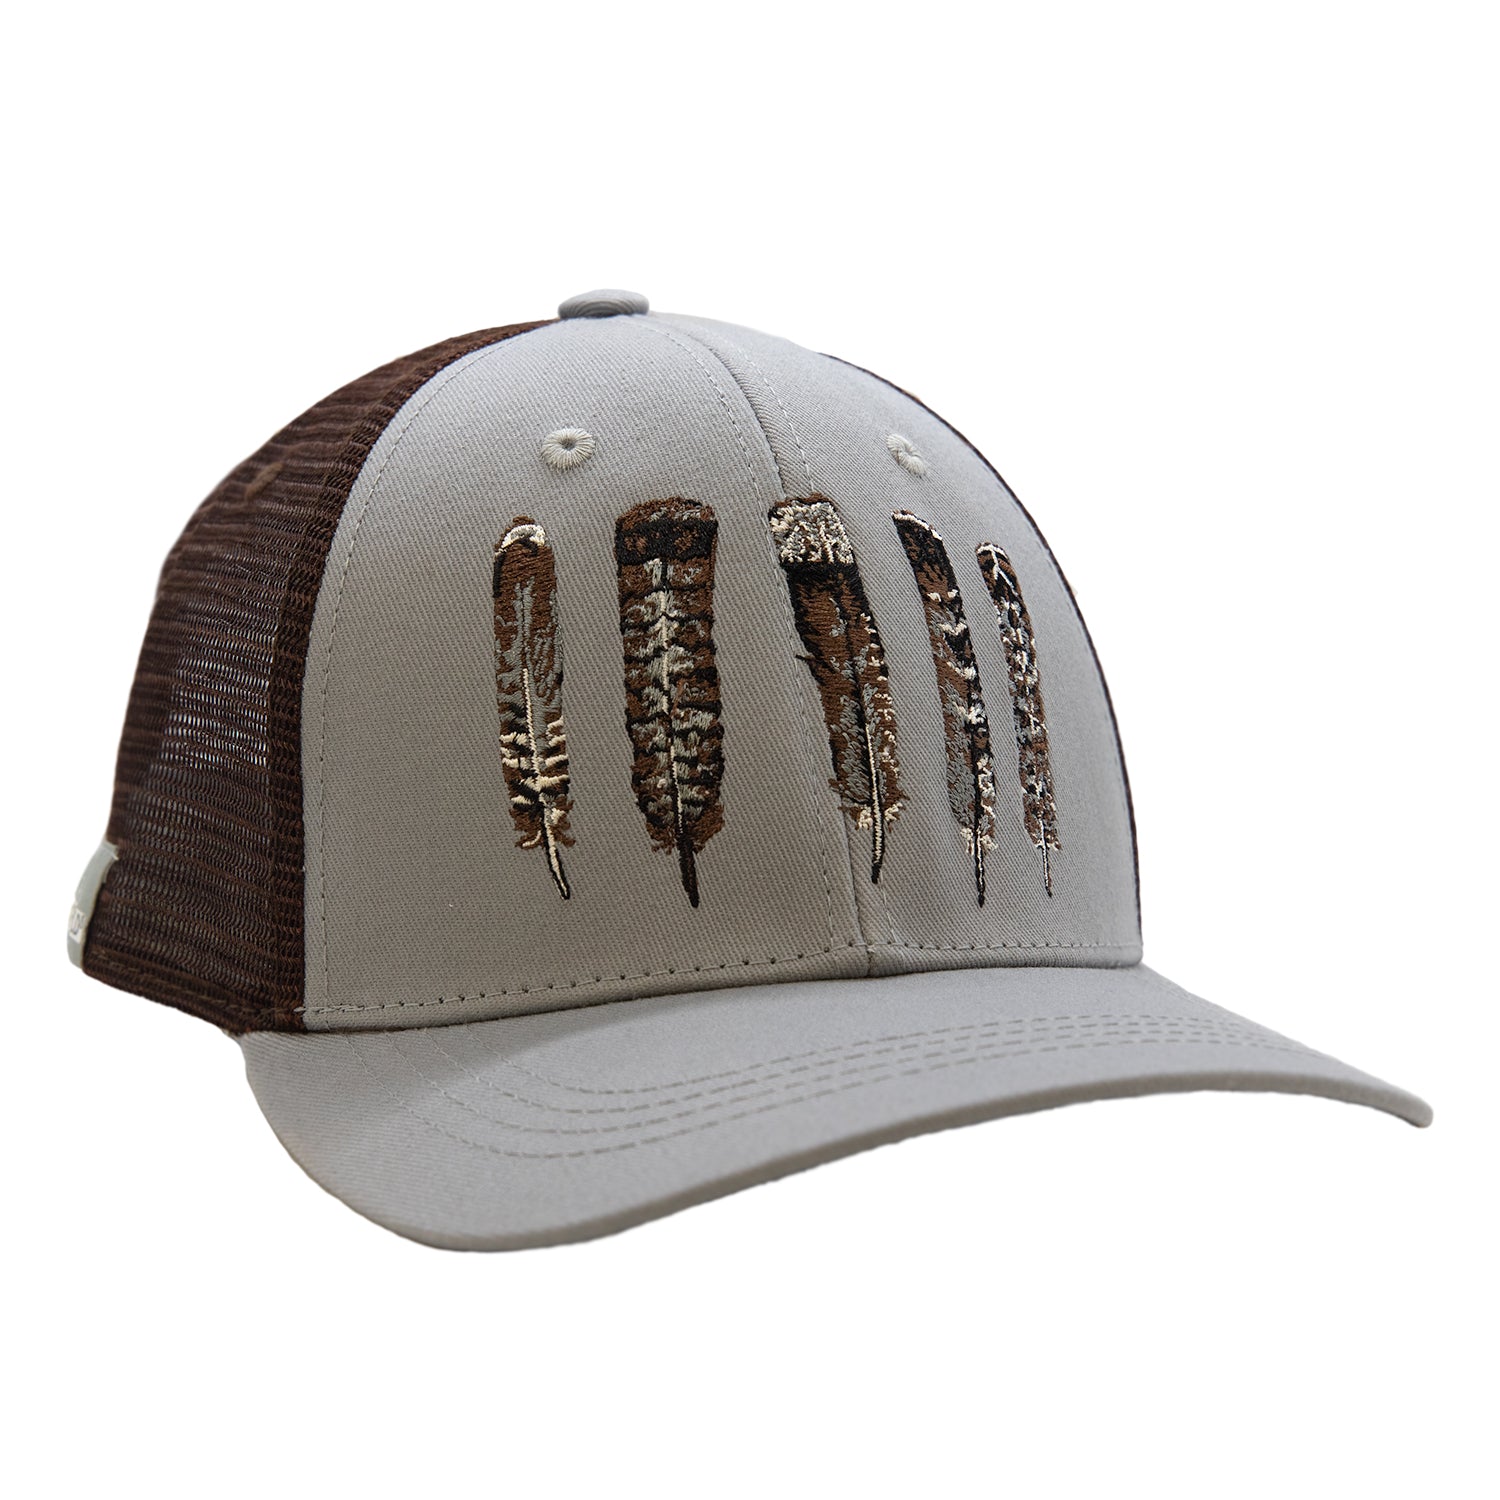 Gray hat with brown mesh back. on the front shows 5 different types of grouse feathers